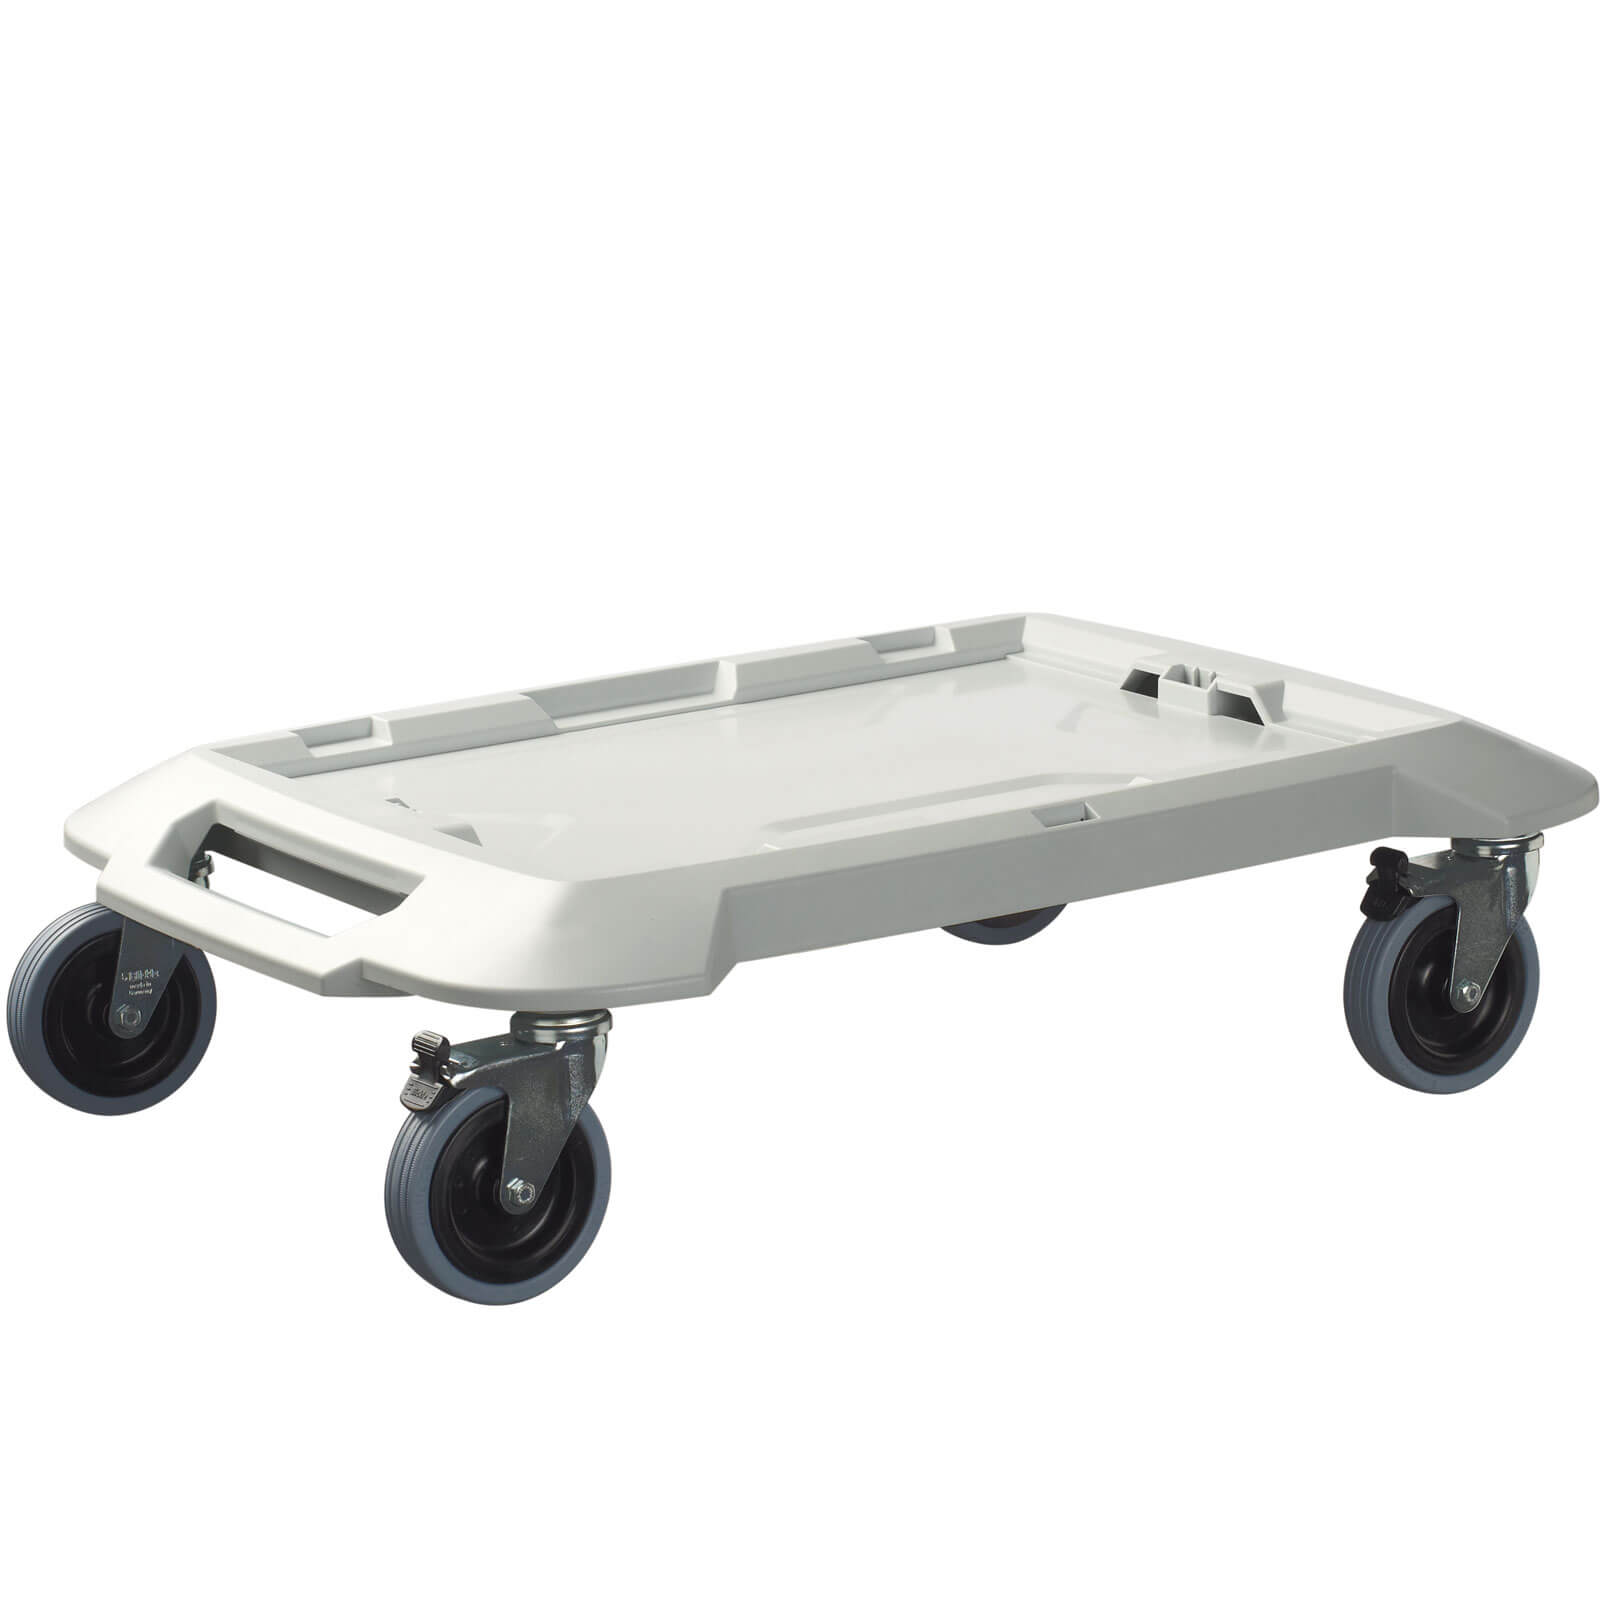 Image of Bosch L-BOXX Carrier Base Roller Caddy